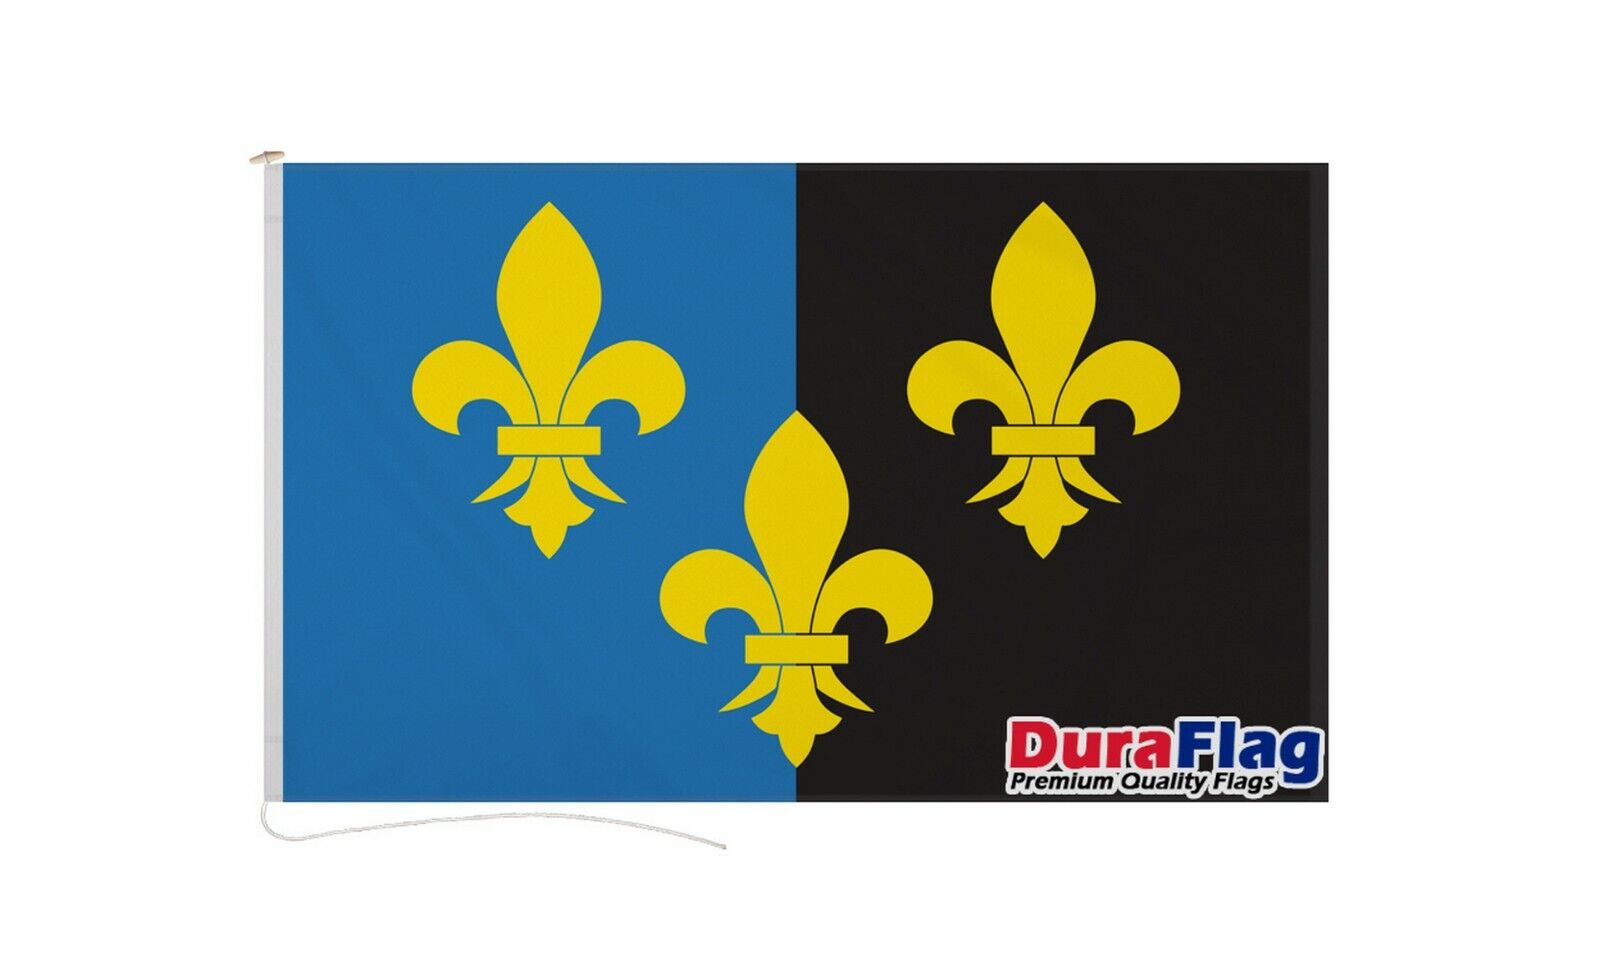 MONMOUTHSHIRE WALES DURAFLAG 150cm x 90cm HIGH QUALITY FLAG ROPE & TOGGLE